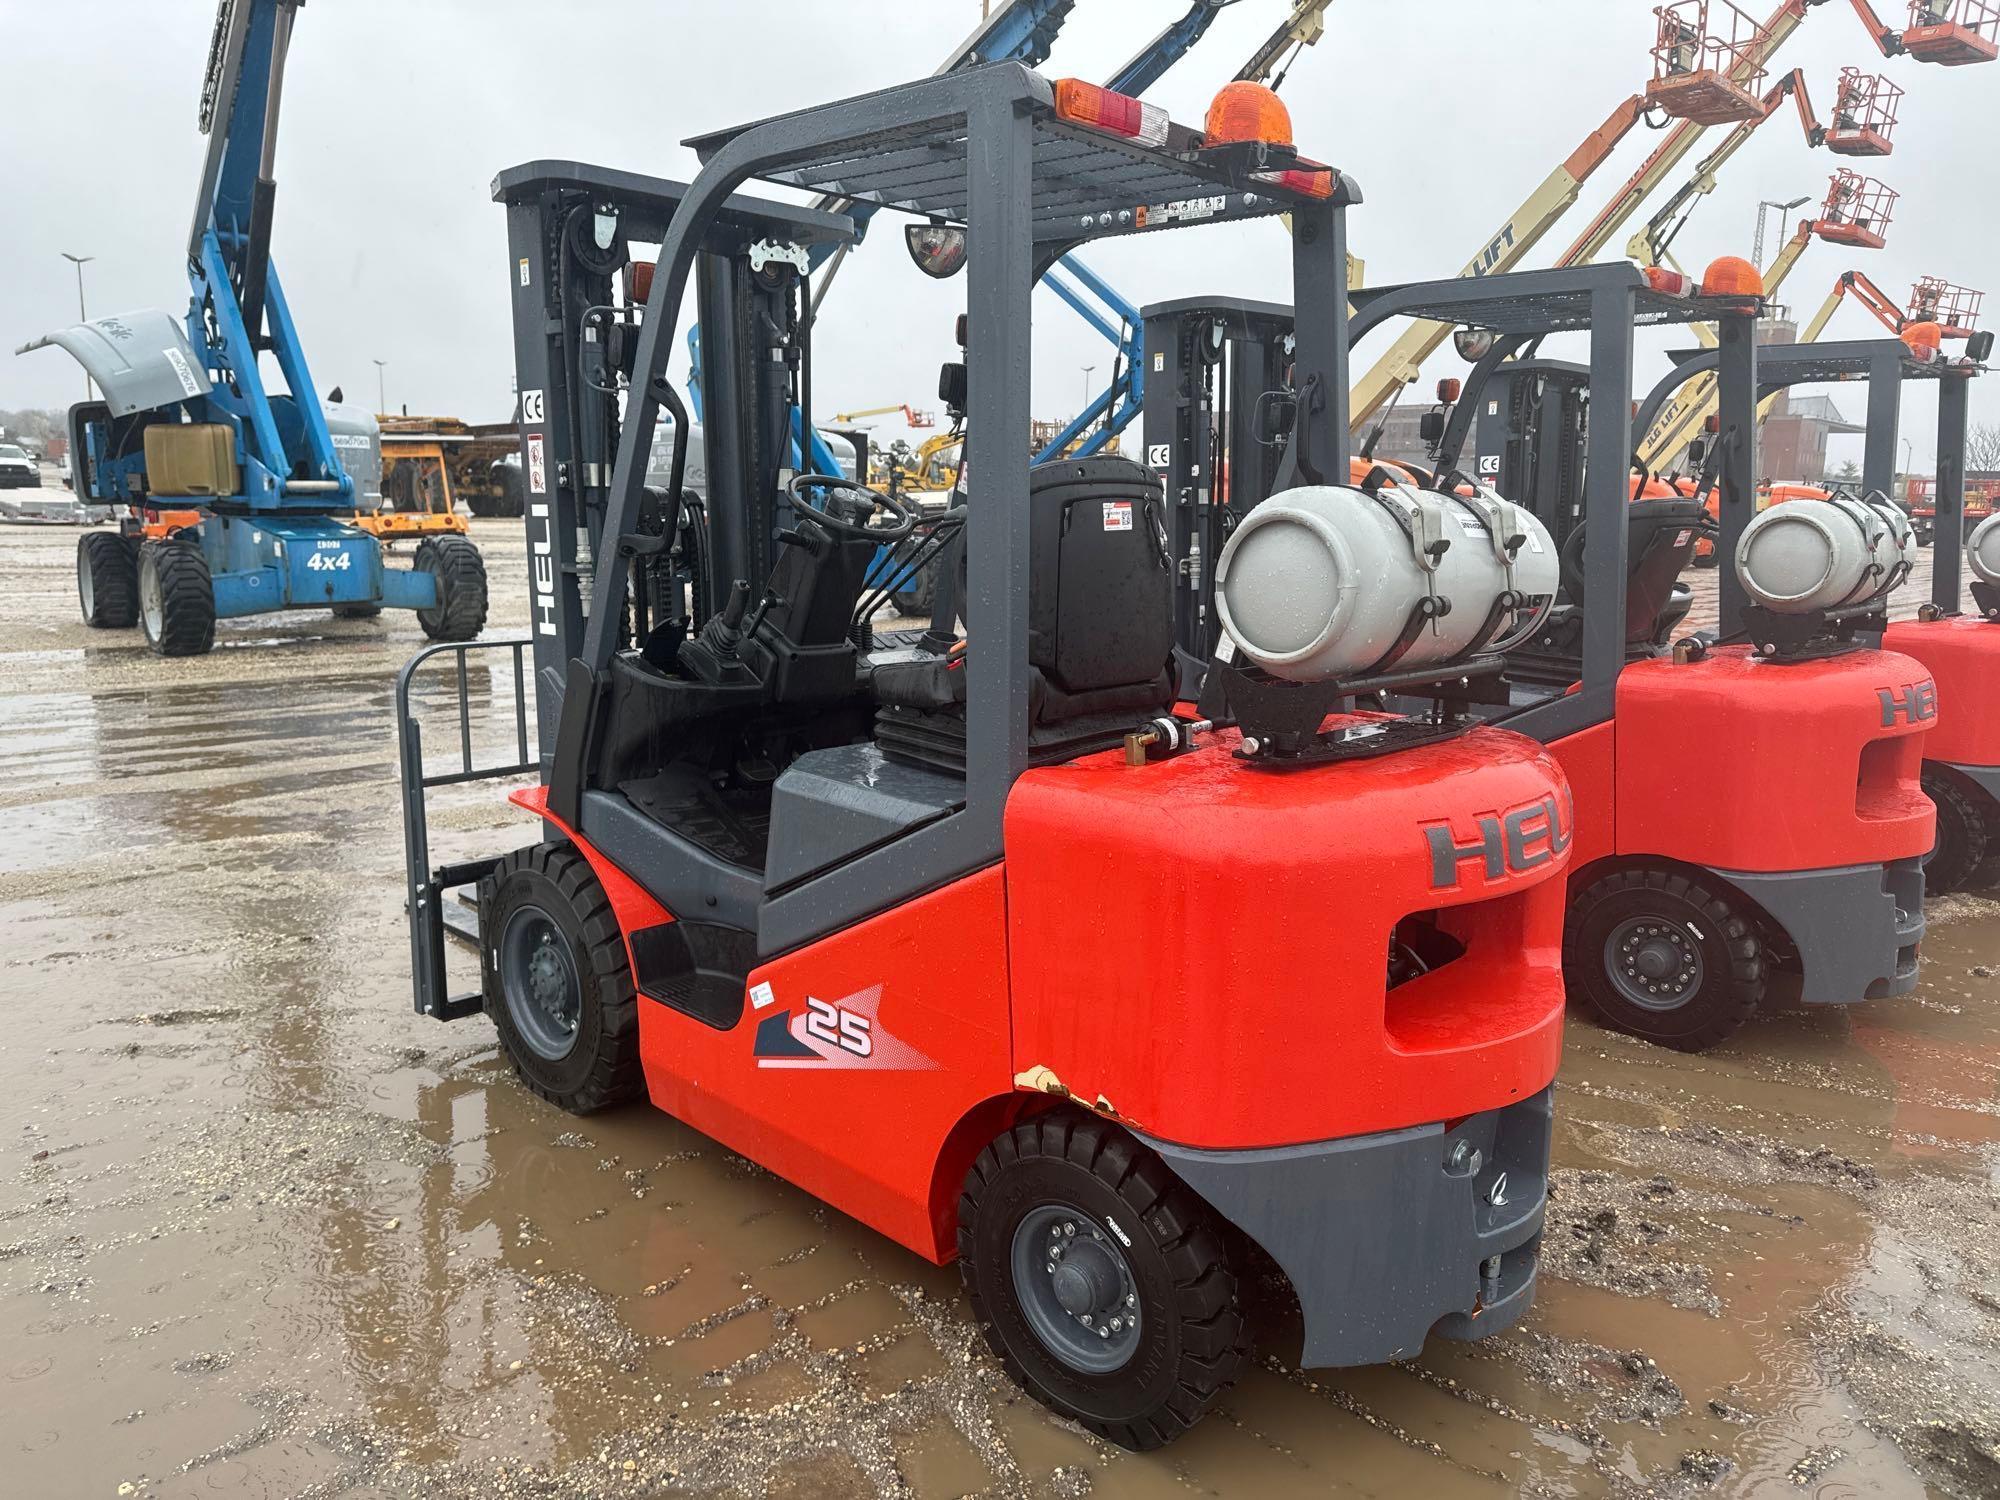 NEW HELI CPYD25 FORKLIFT SN:A8961 powered by LP engine, equipped with OROPS, 5,000lb lift capacity,